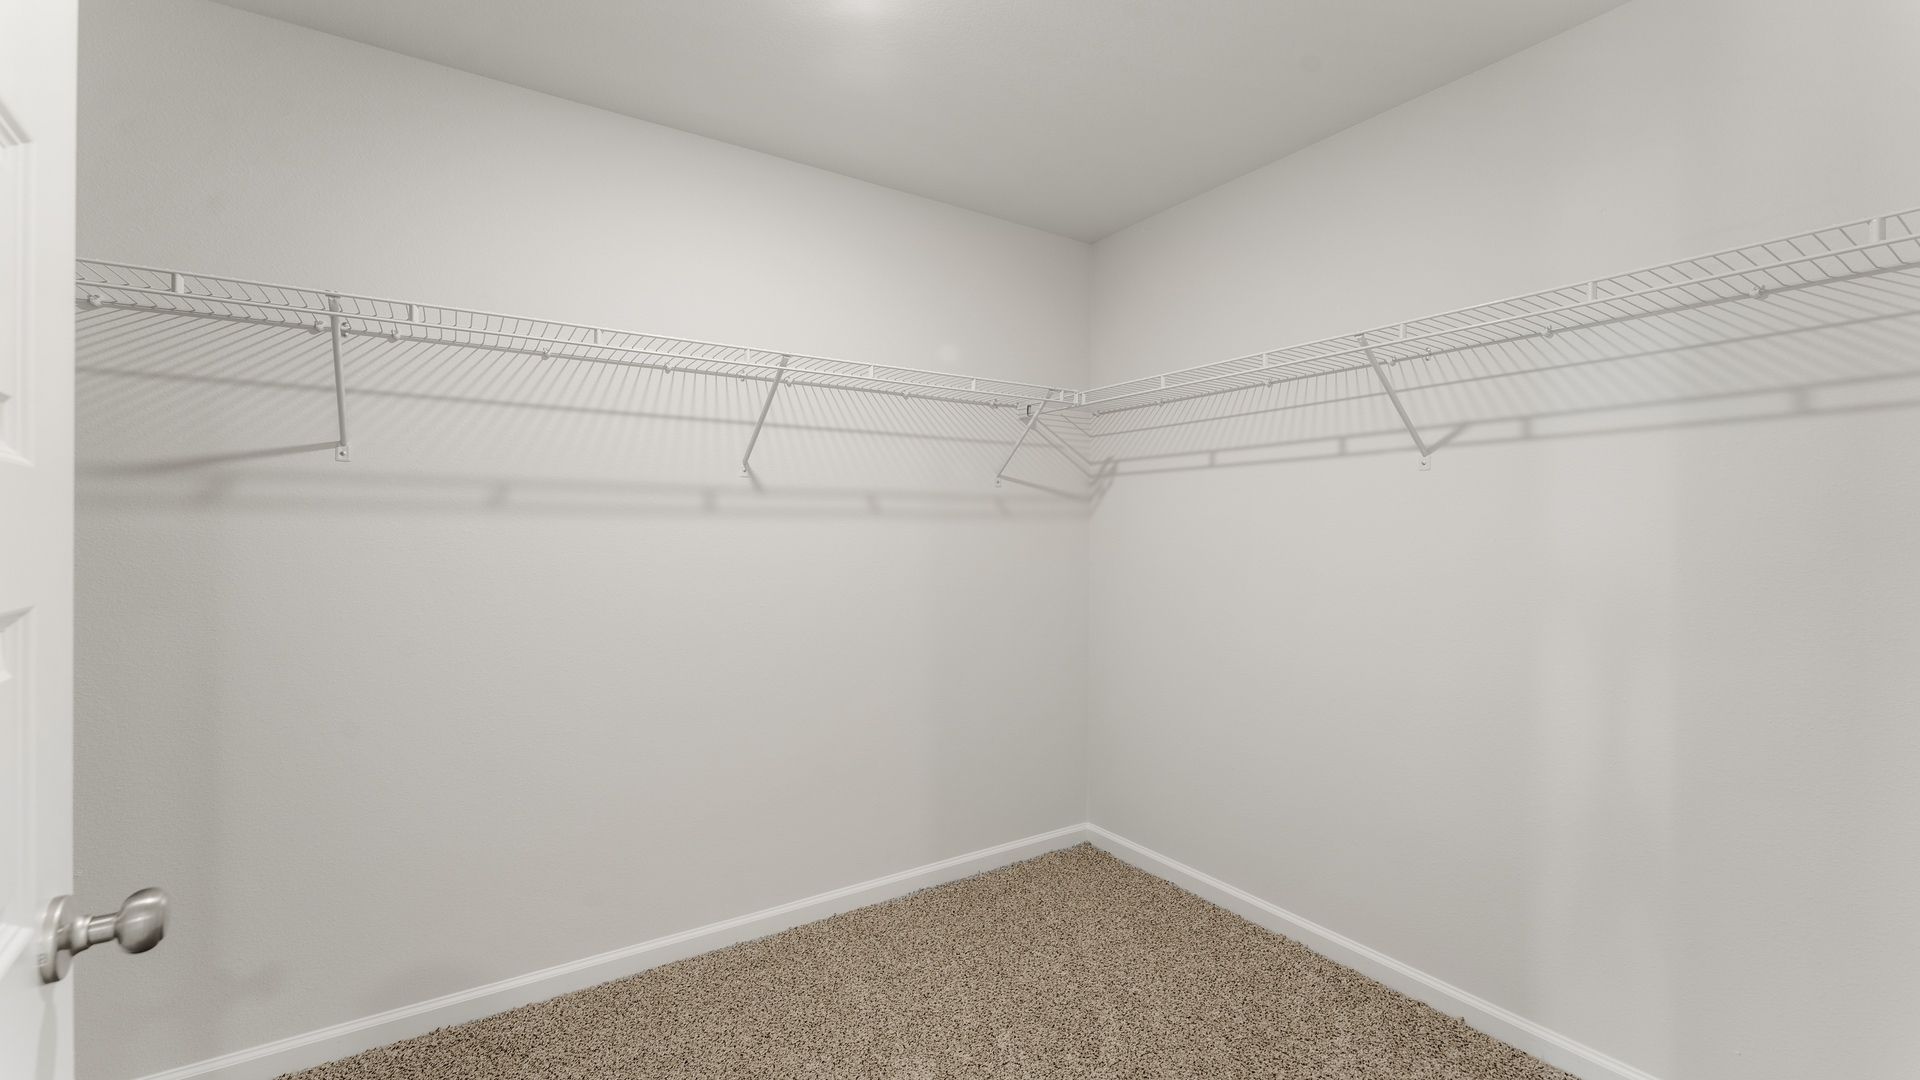 Bathroom walk-in closet with ventilated shelving.